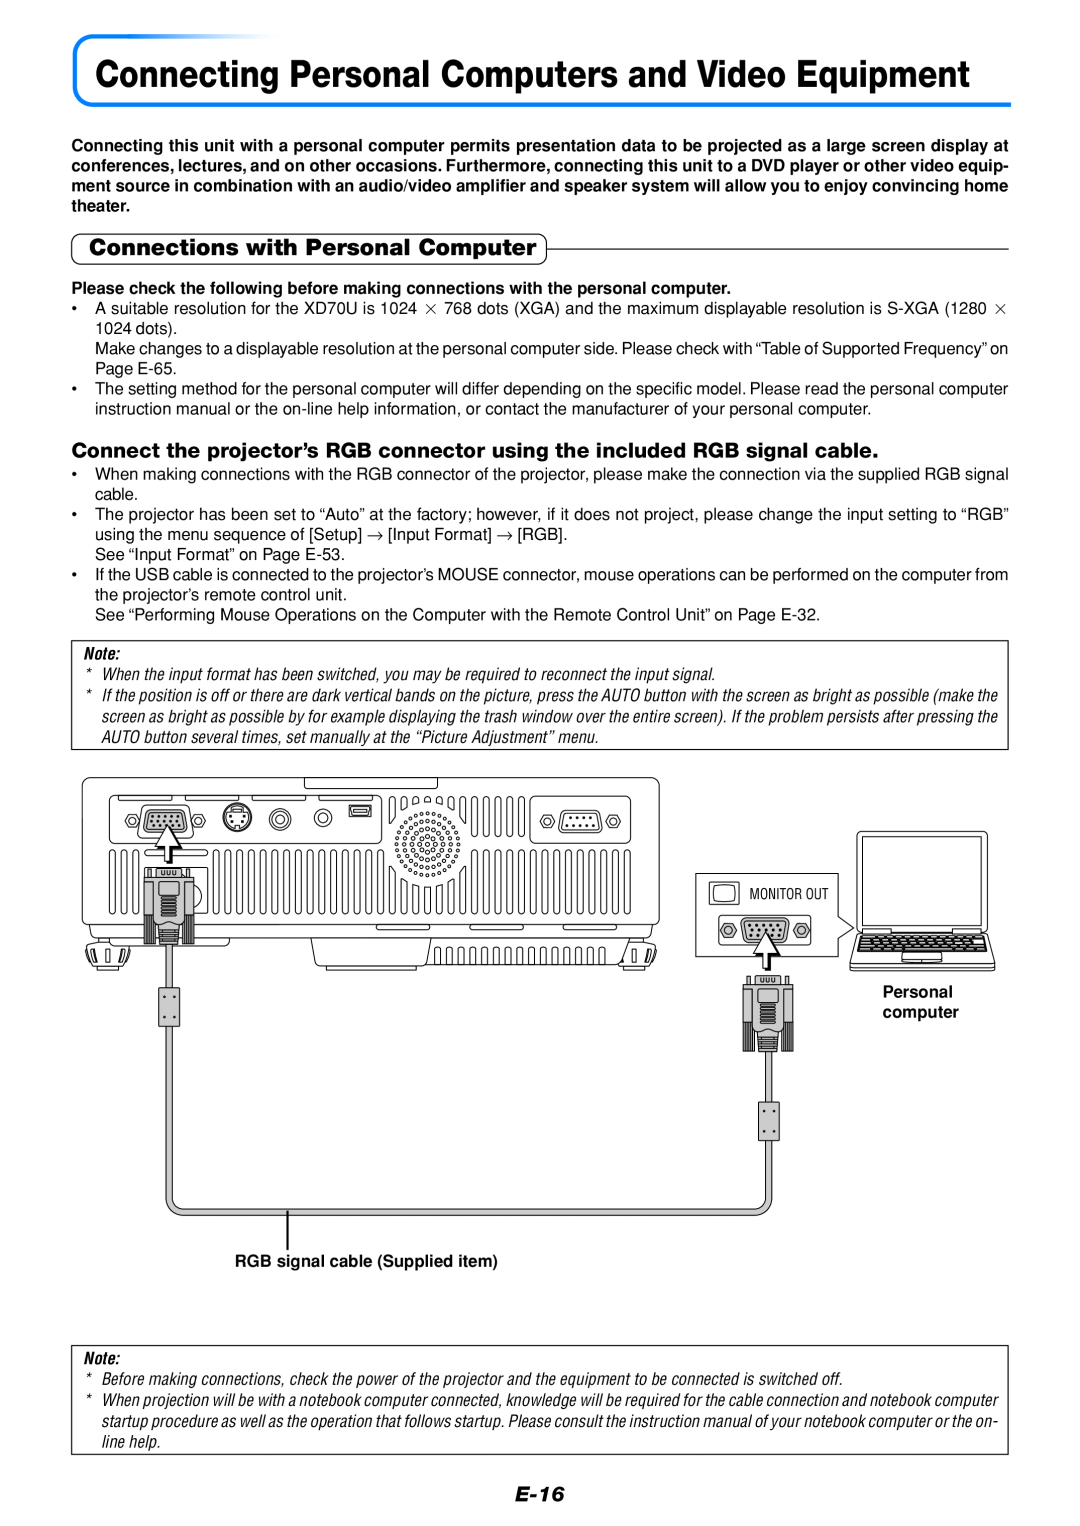 Mitsubishi Electronics DATA PROJECTOR user manual Connections with Personal Computer, E-16 